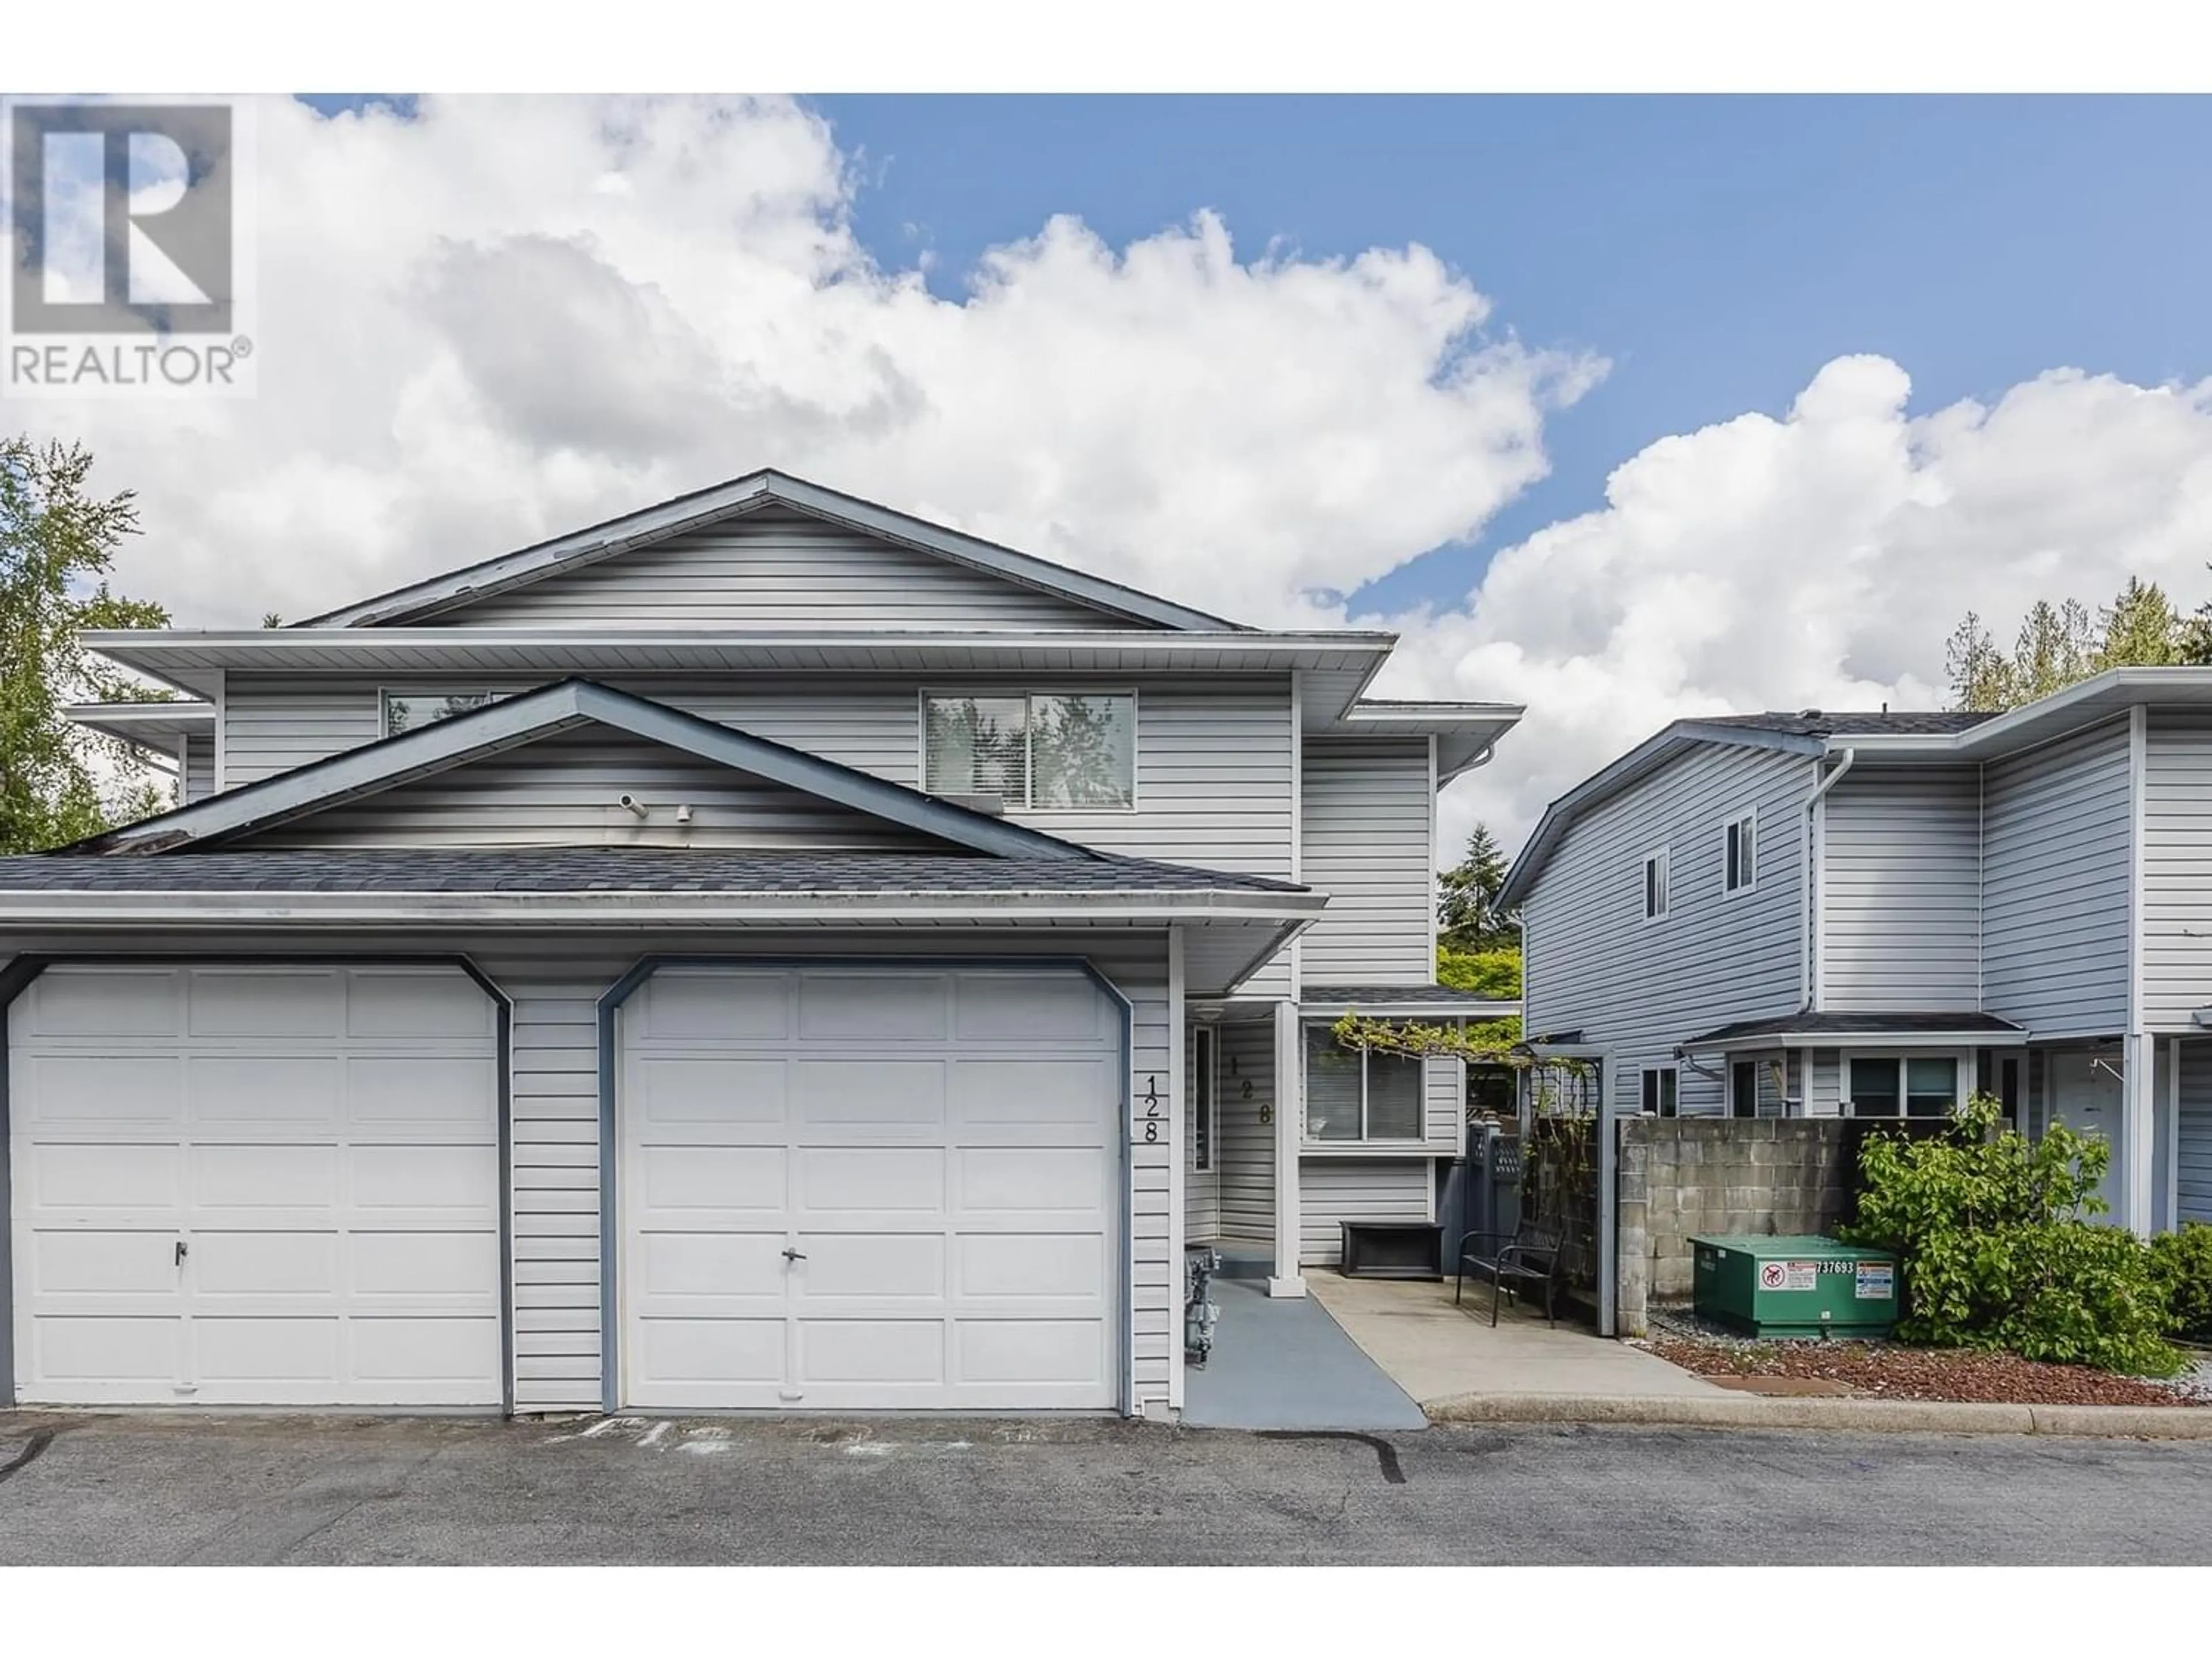 A pic from exterior of the house or condo for 128 11255 HARRISON STREET, Maple Ridge British Columbia V2X0K2